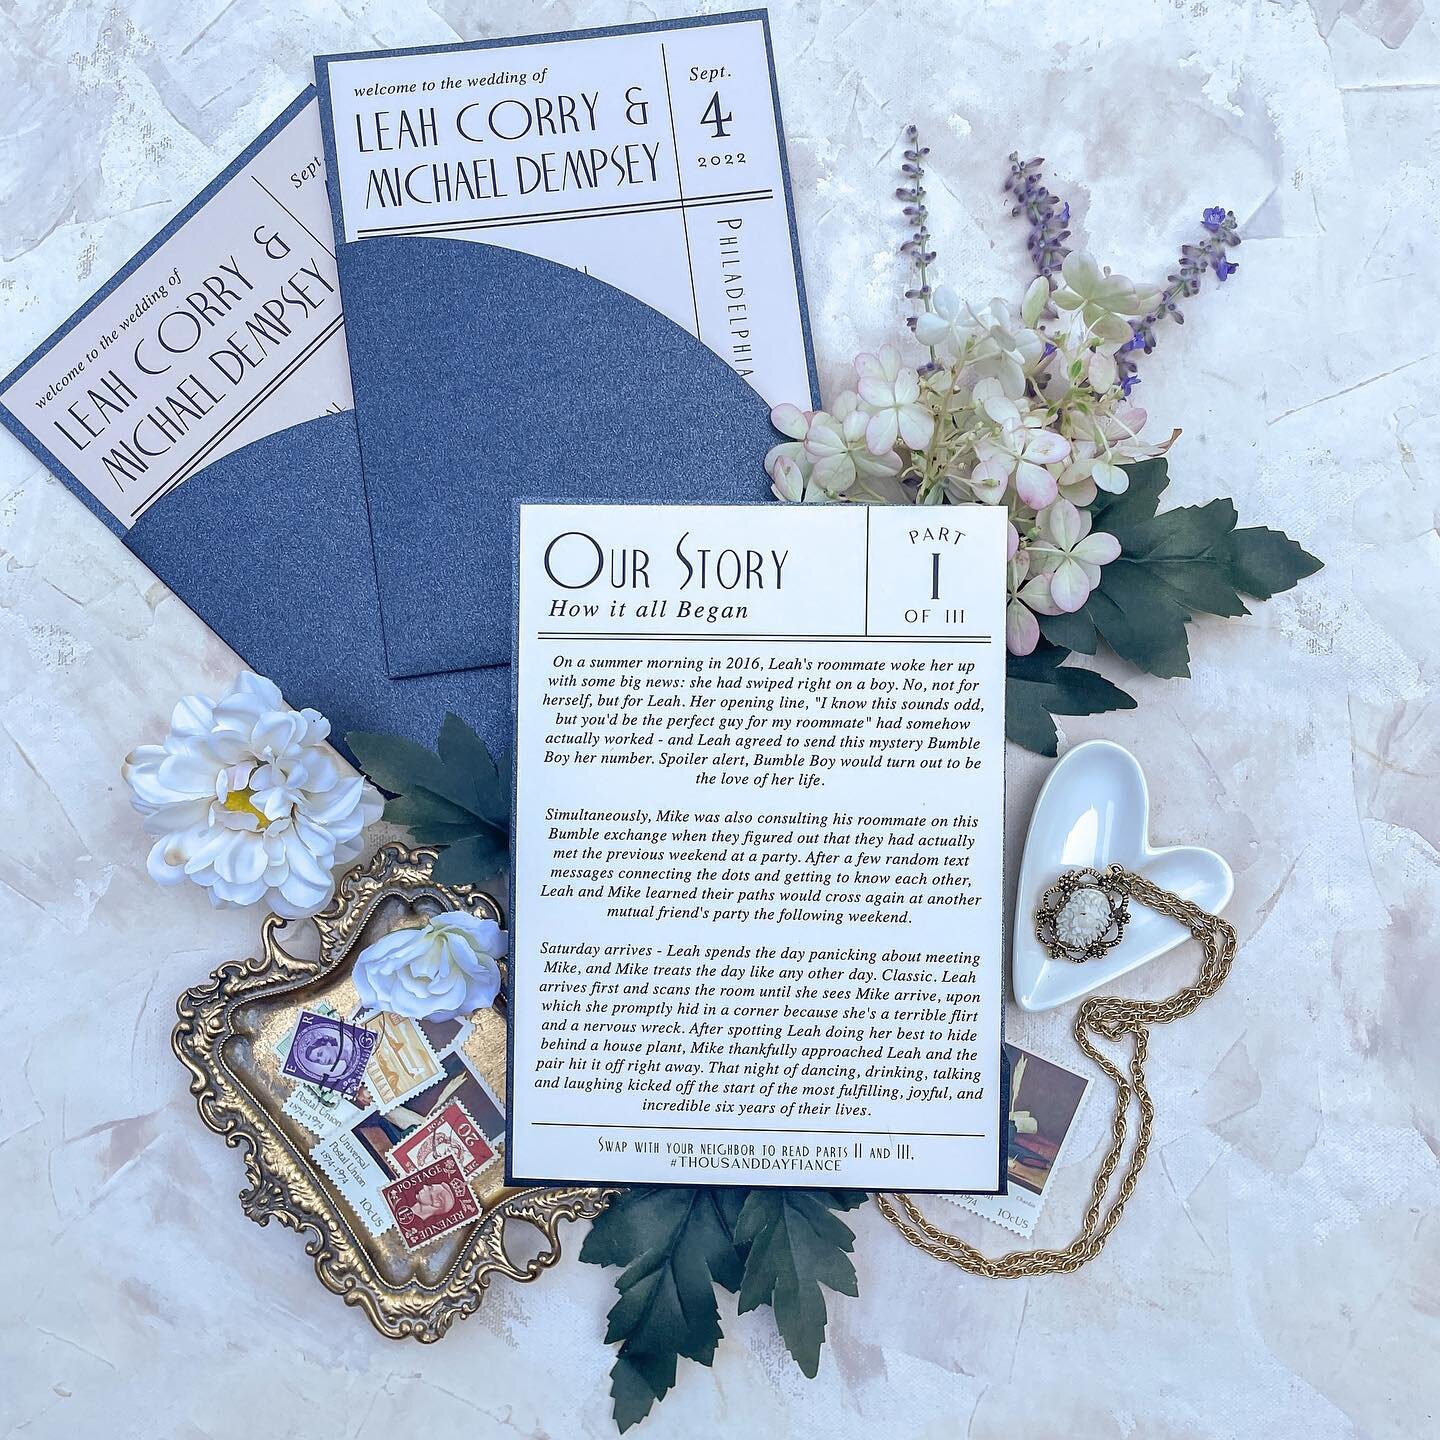 An interactive program that serves as an experience for your guests? Leah. NAILED. It. 

On these programs, we kept the front consistent while dividing their love story into three &ldquo;chapters&rdquo; on the back. Guests were able to read and swap 